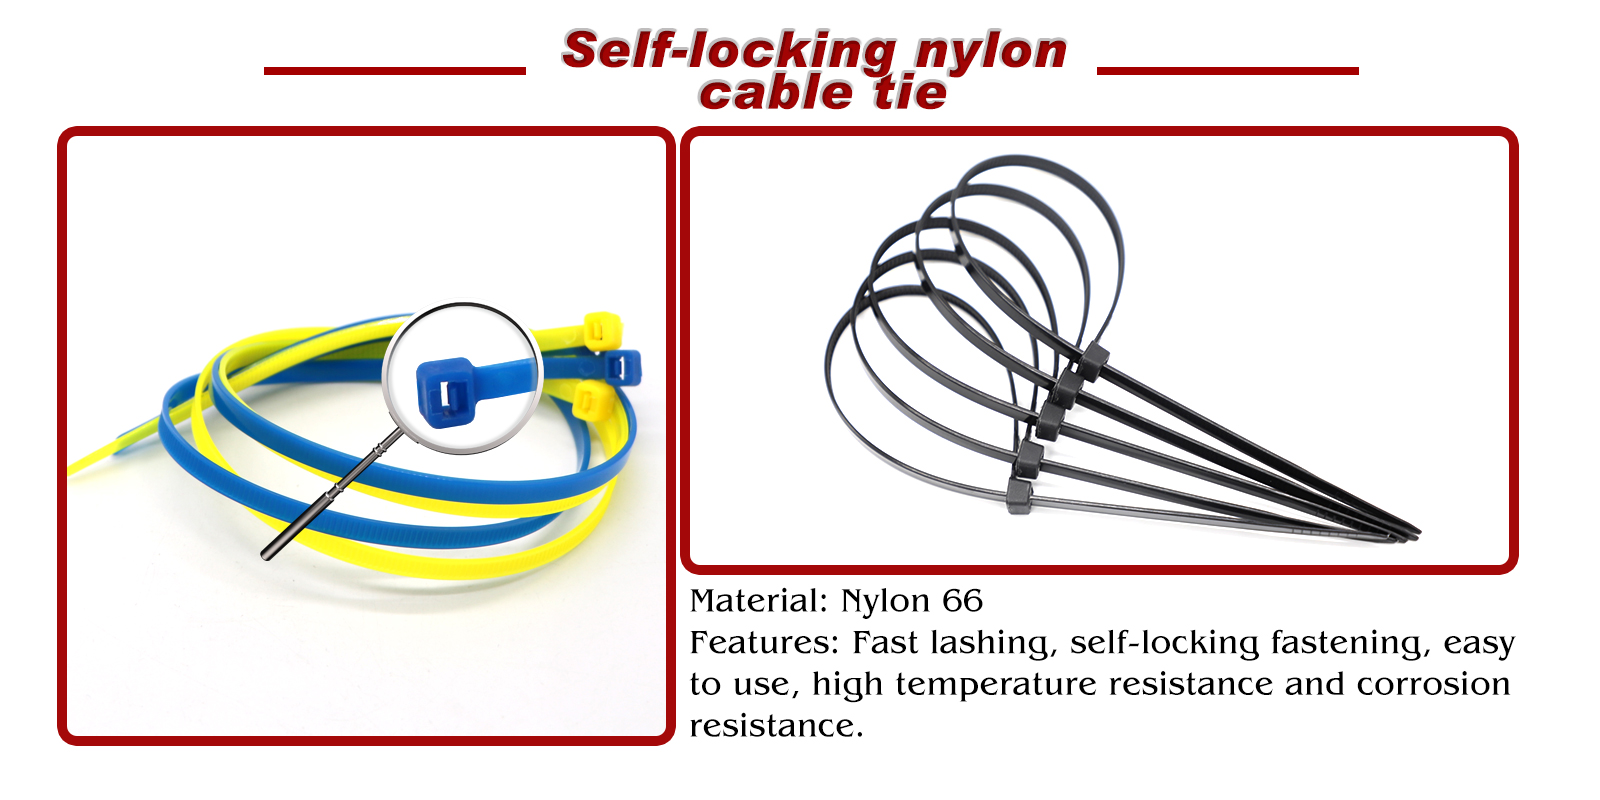 Have you ever used self-locking nylon cable ties?